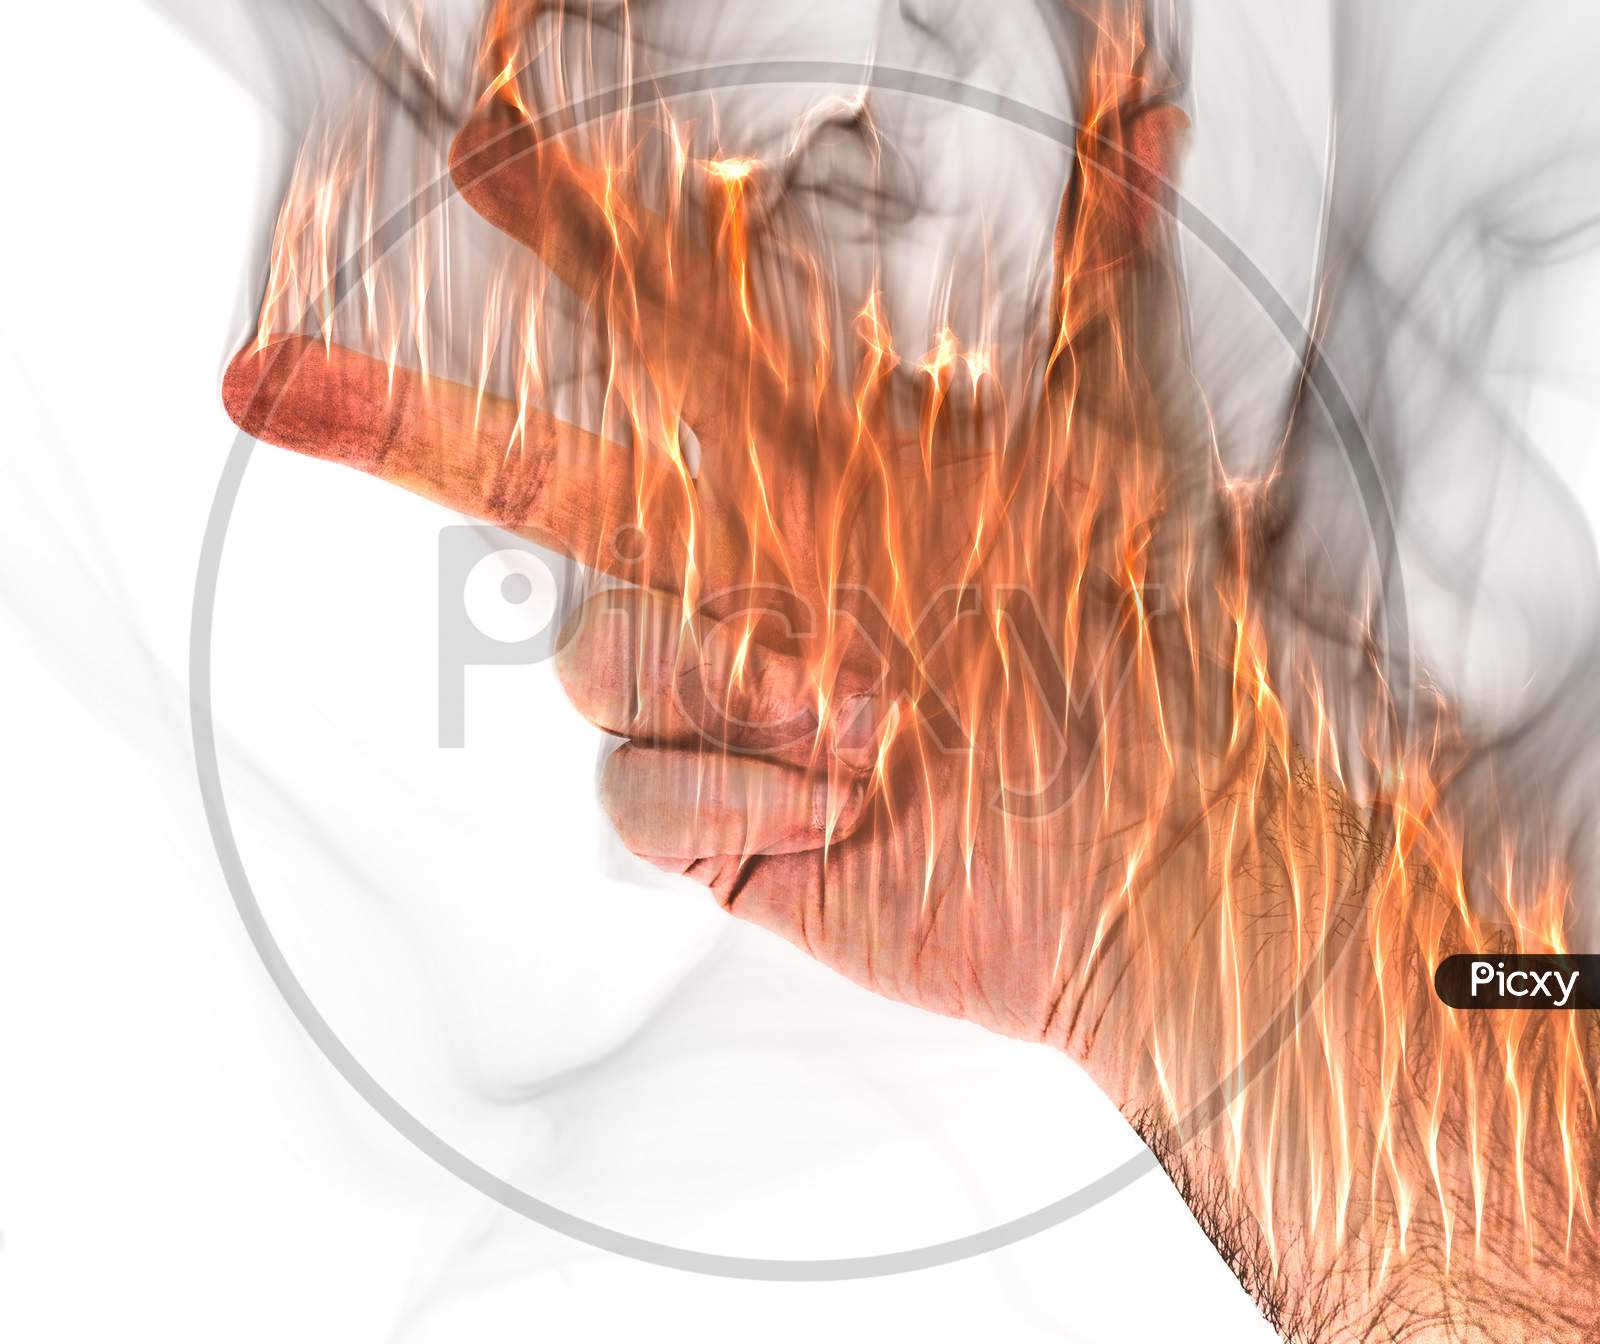 A human hand on fire burning with orange flames and some smoke in front of a white background